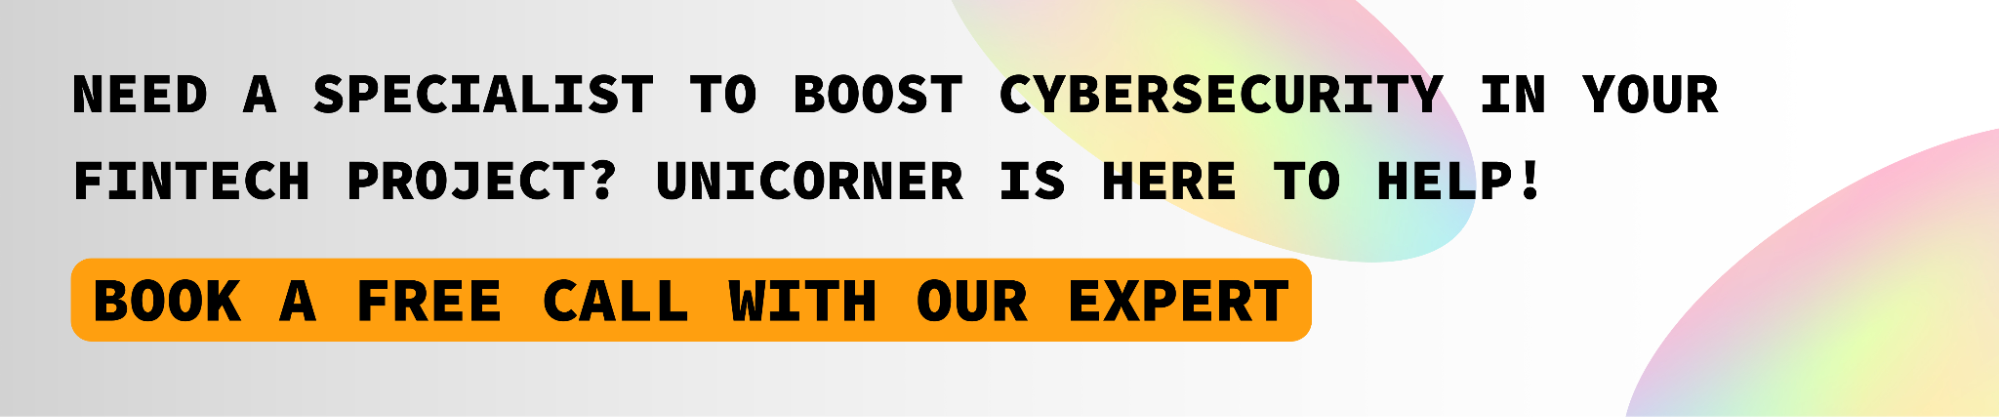 Need a specialist to boost cybersecurity in your FinTech project?